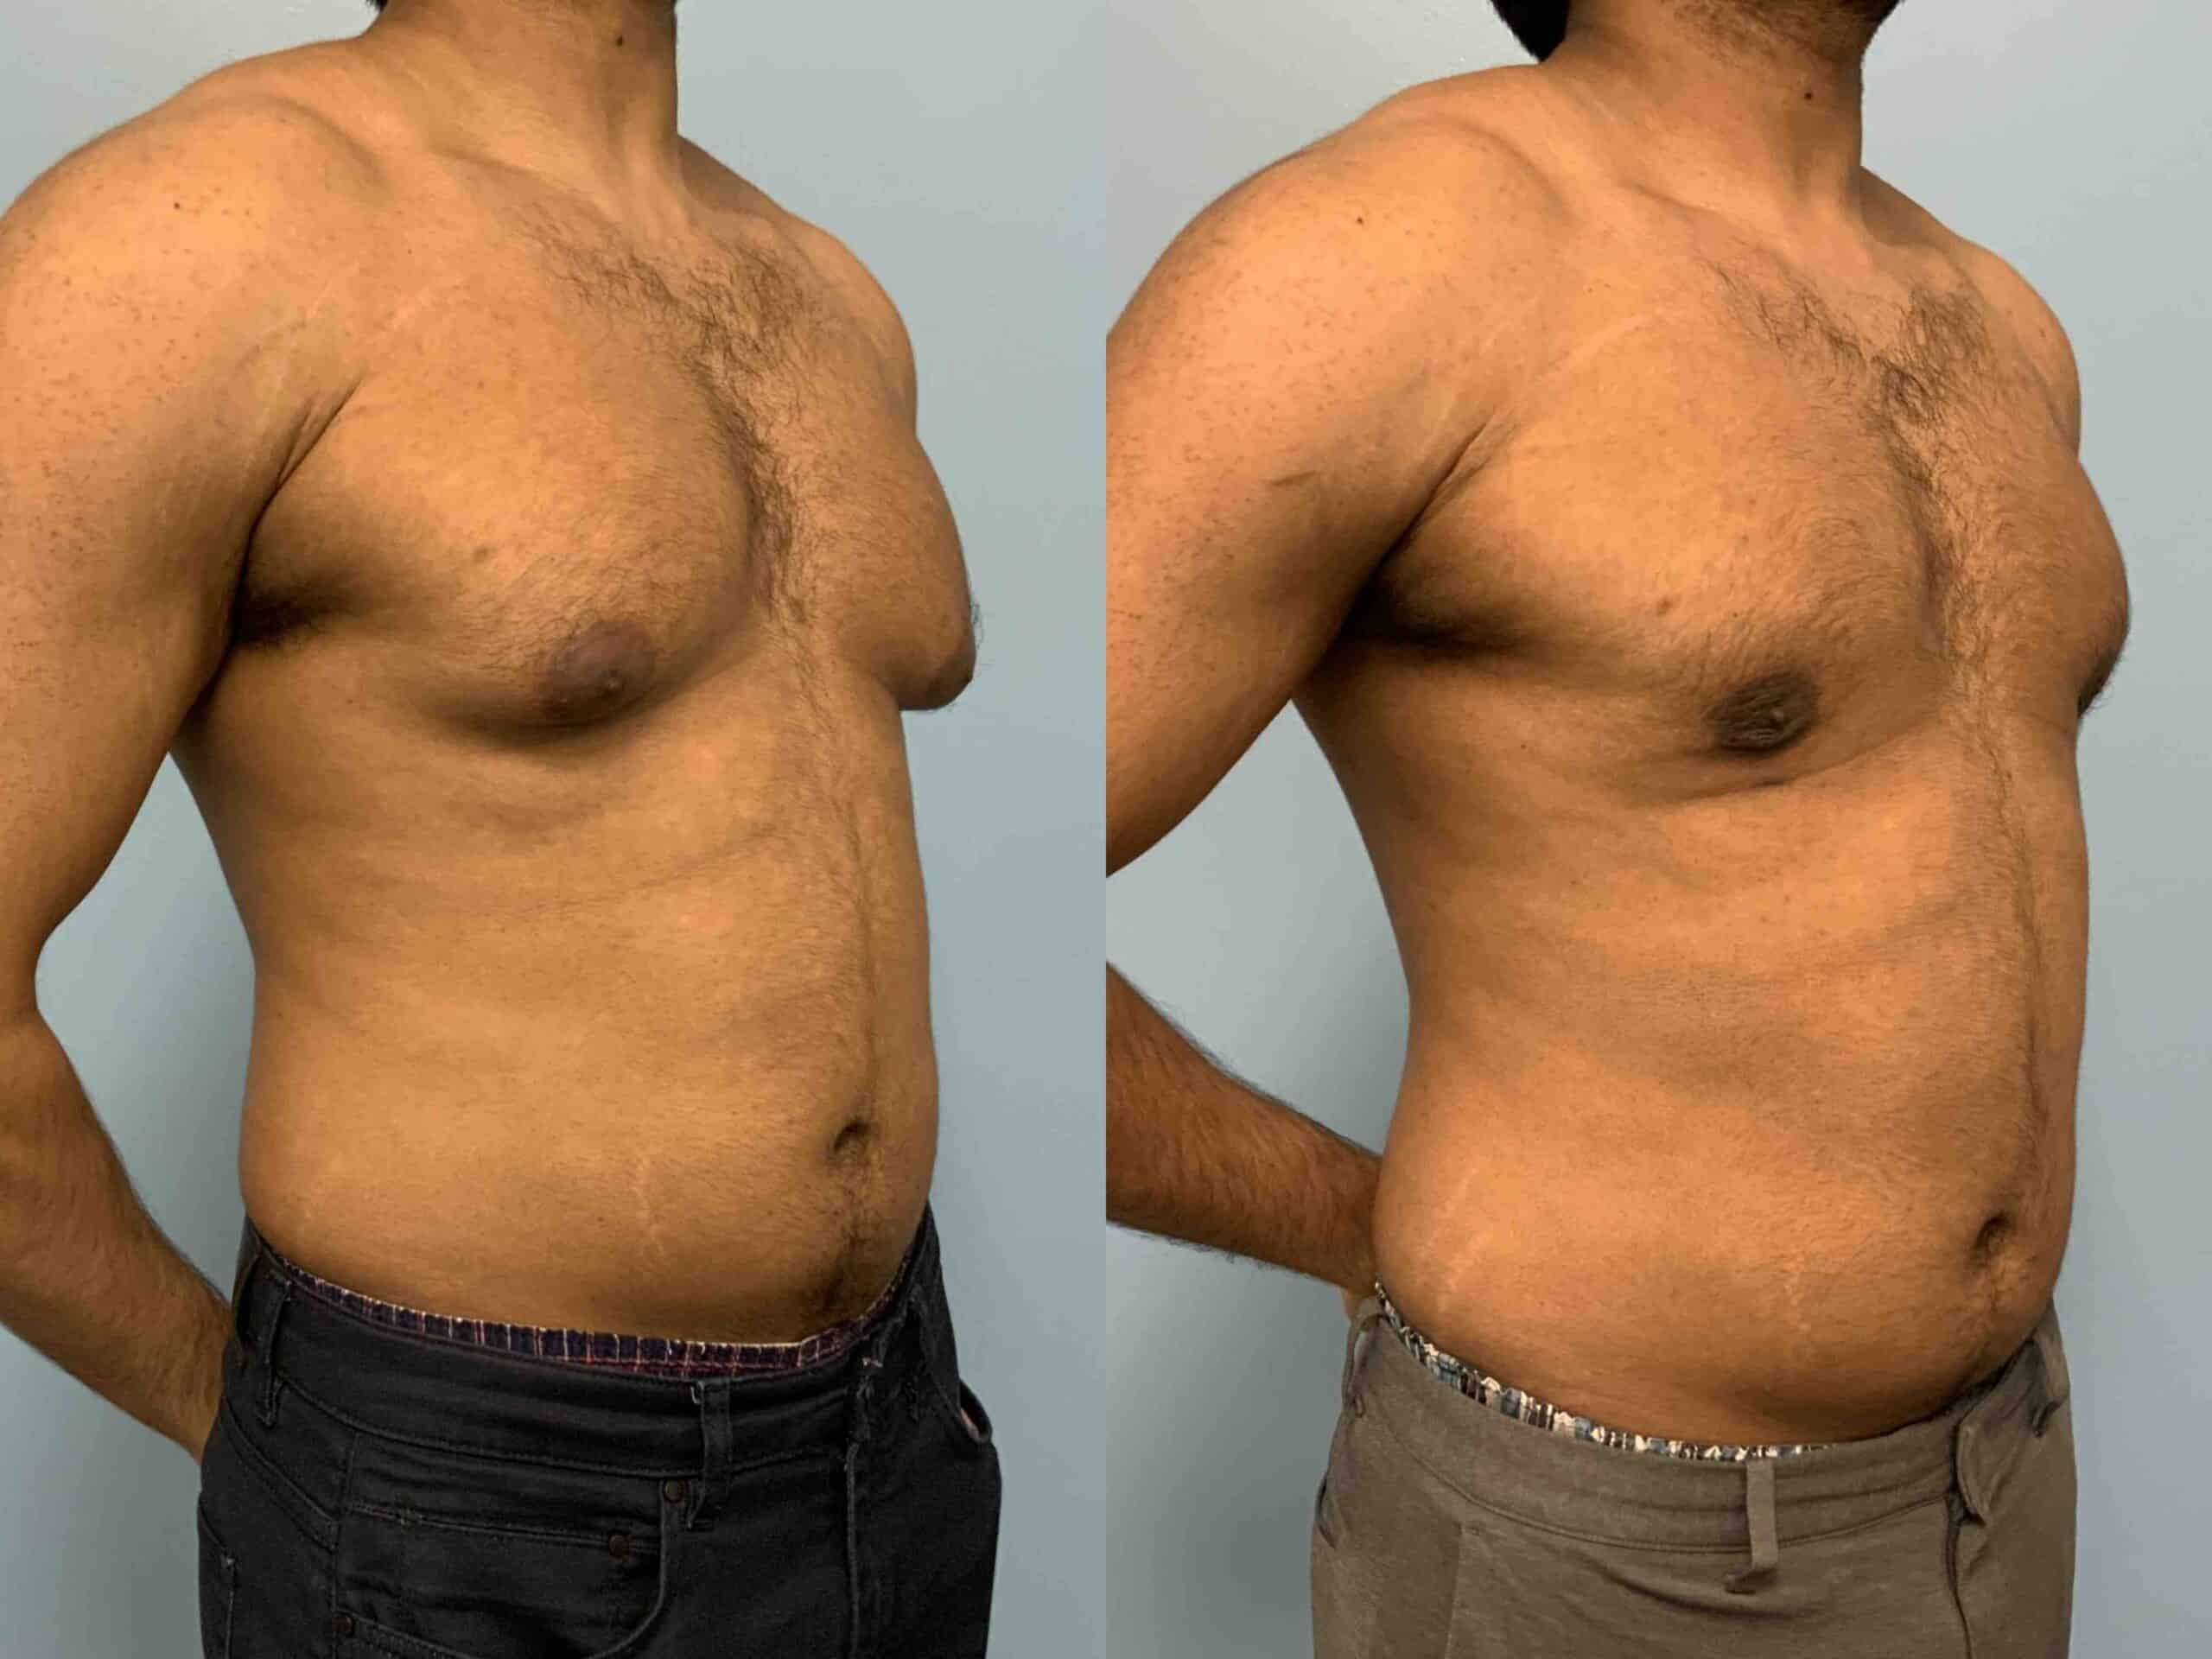 Before and after, patient 3 mo post op from Renuvion Chest, VASER Chest, Gynecomastia procedure performed by Dr. Paul Vanek